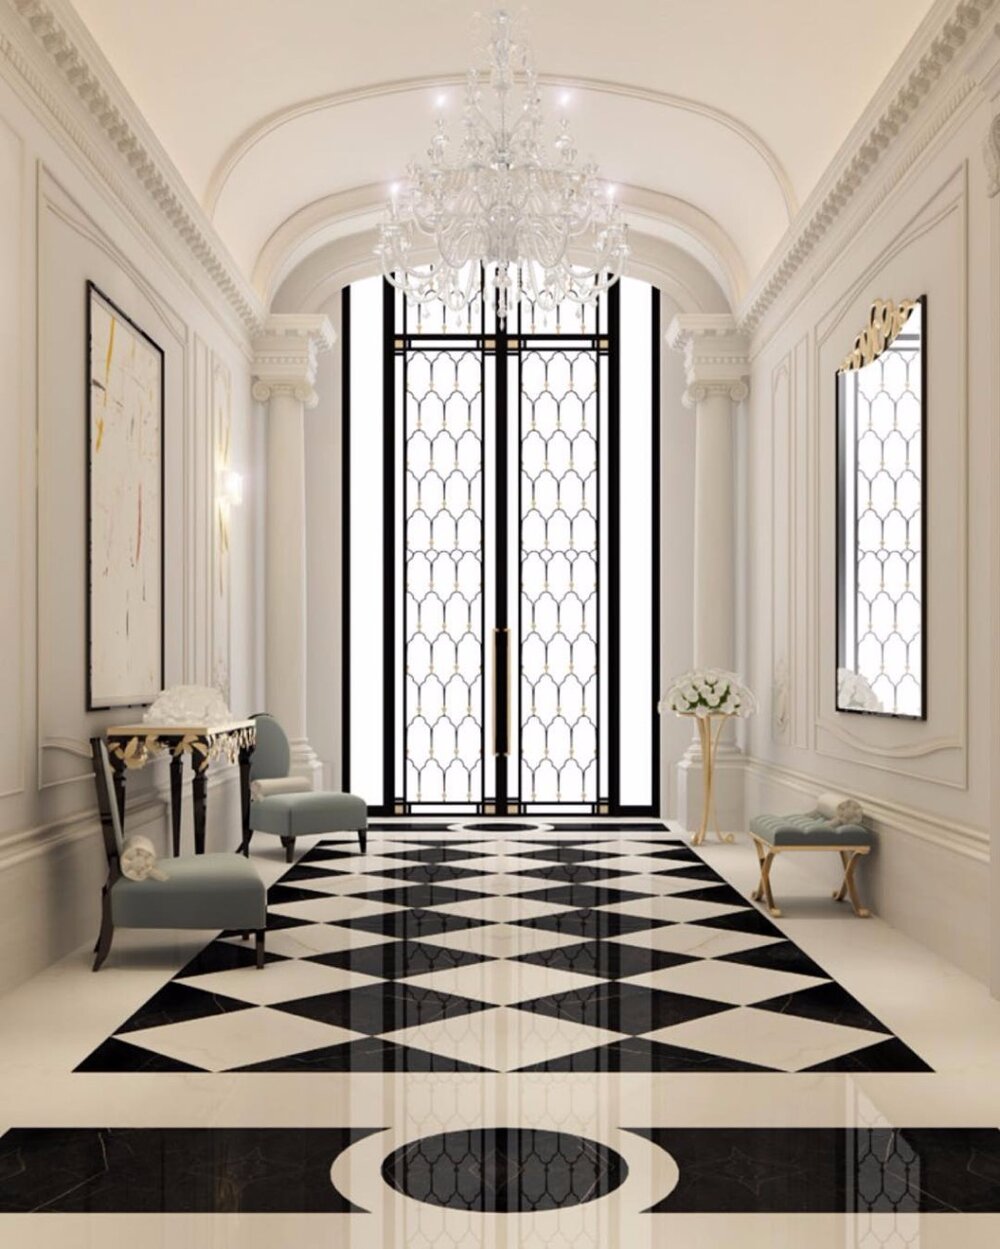 Checkered Floors by Ions Interior Design